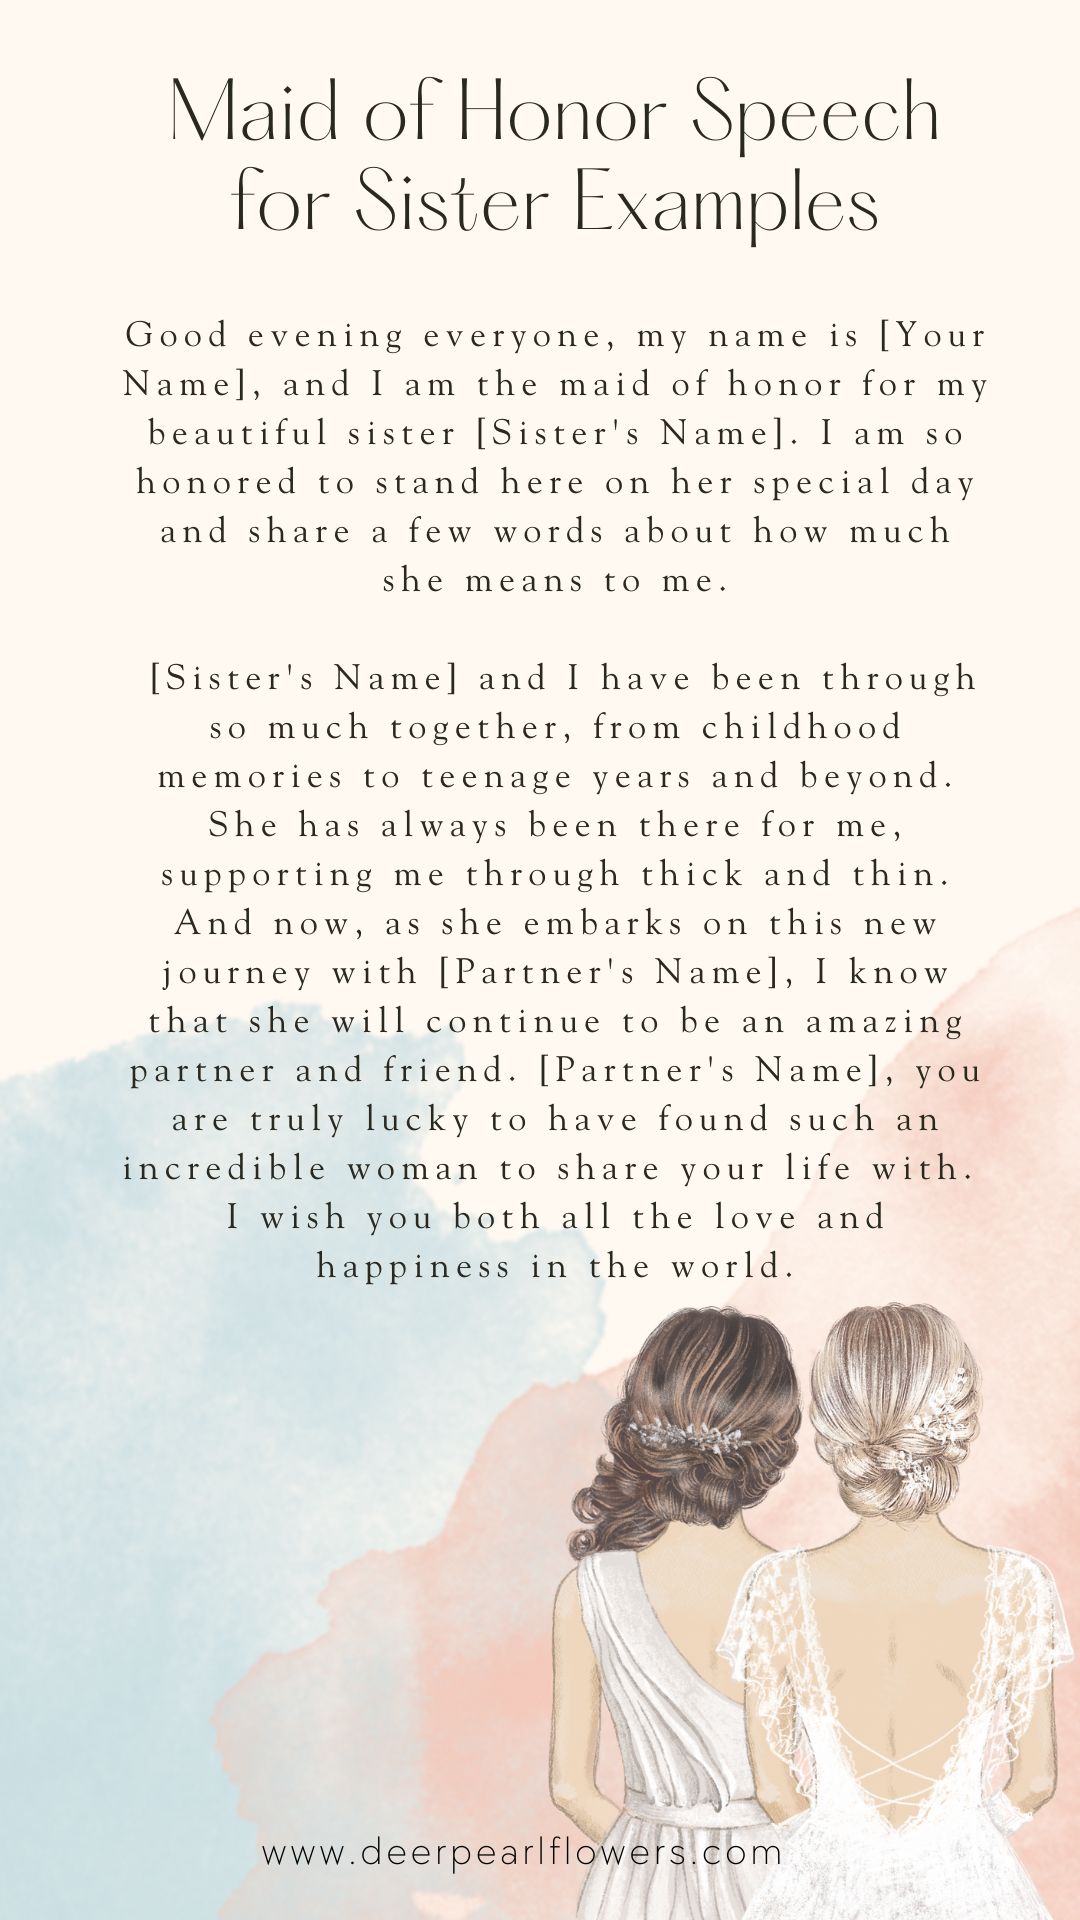 example of wedding speech for sister